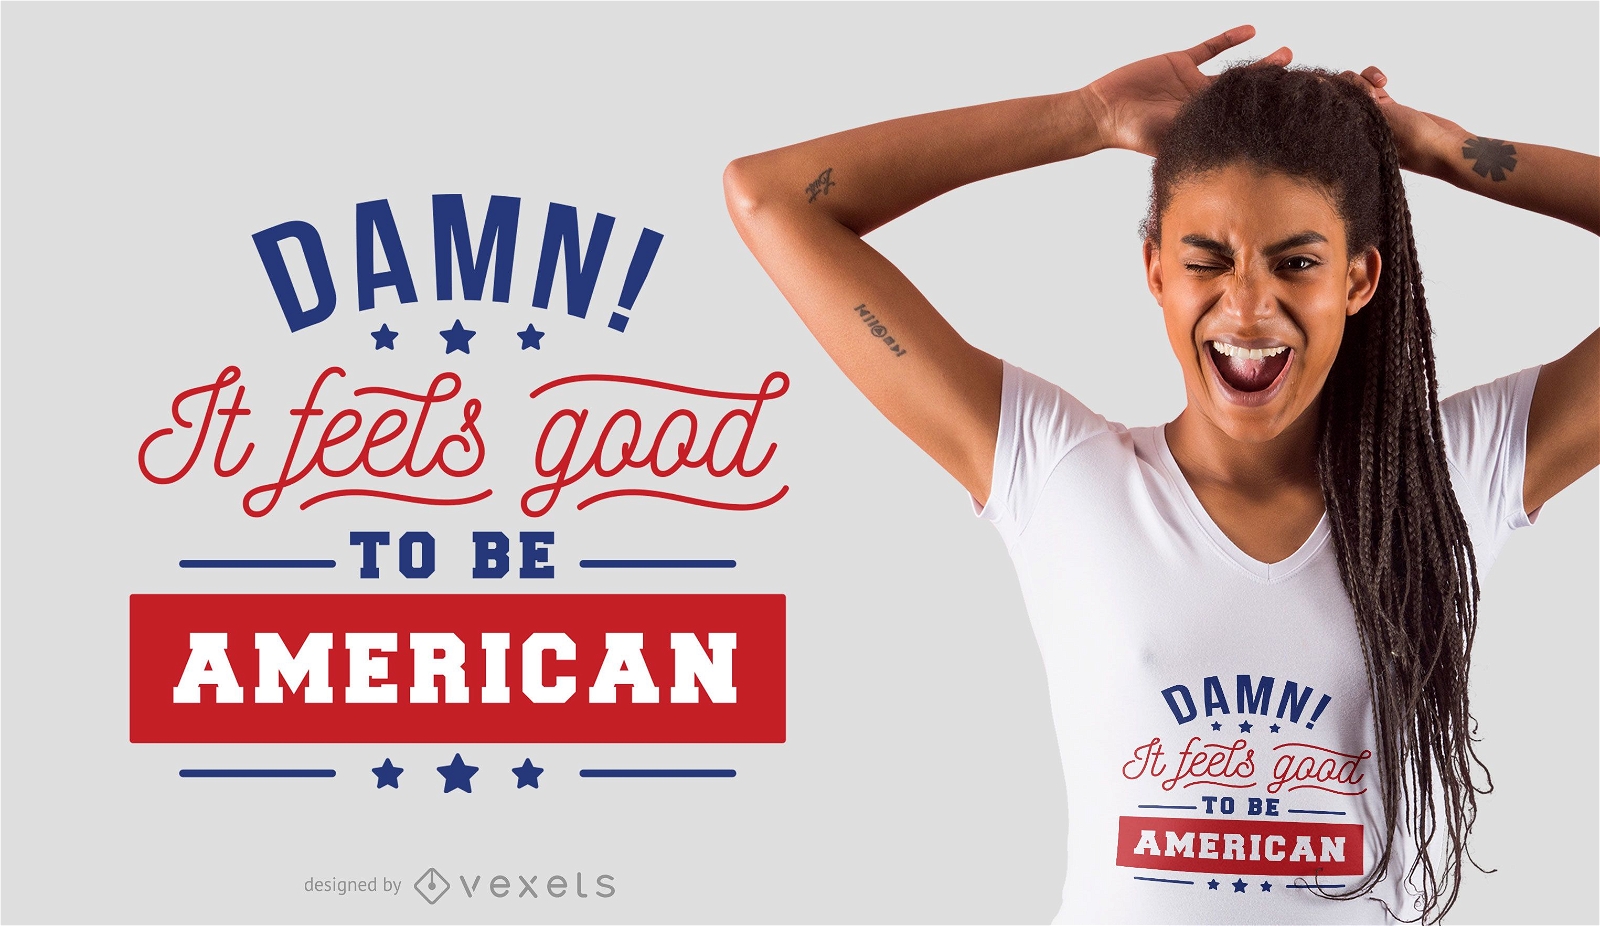 Good to be american t-shirt design